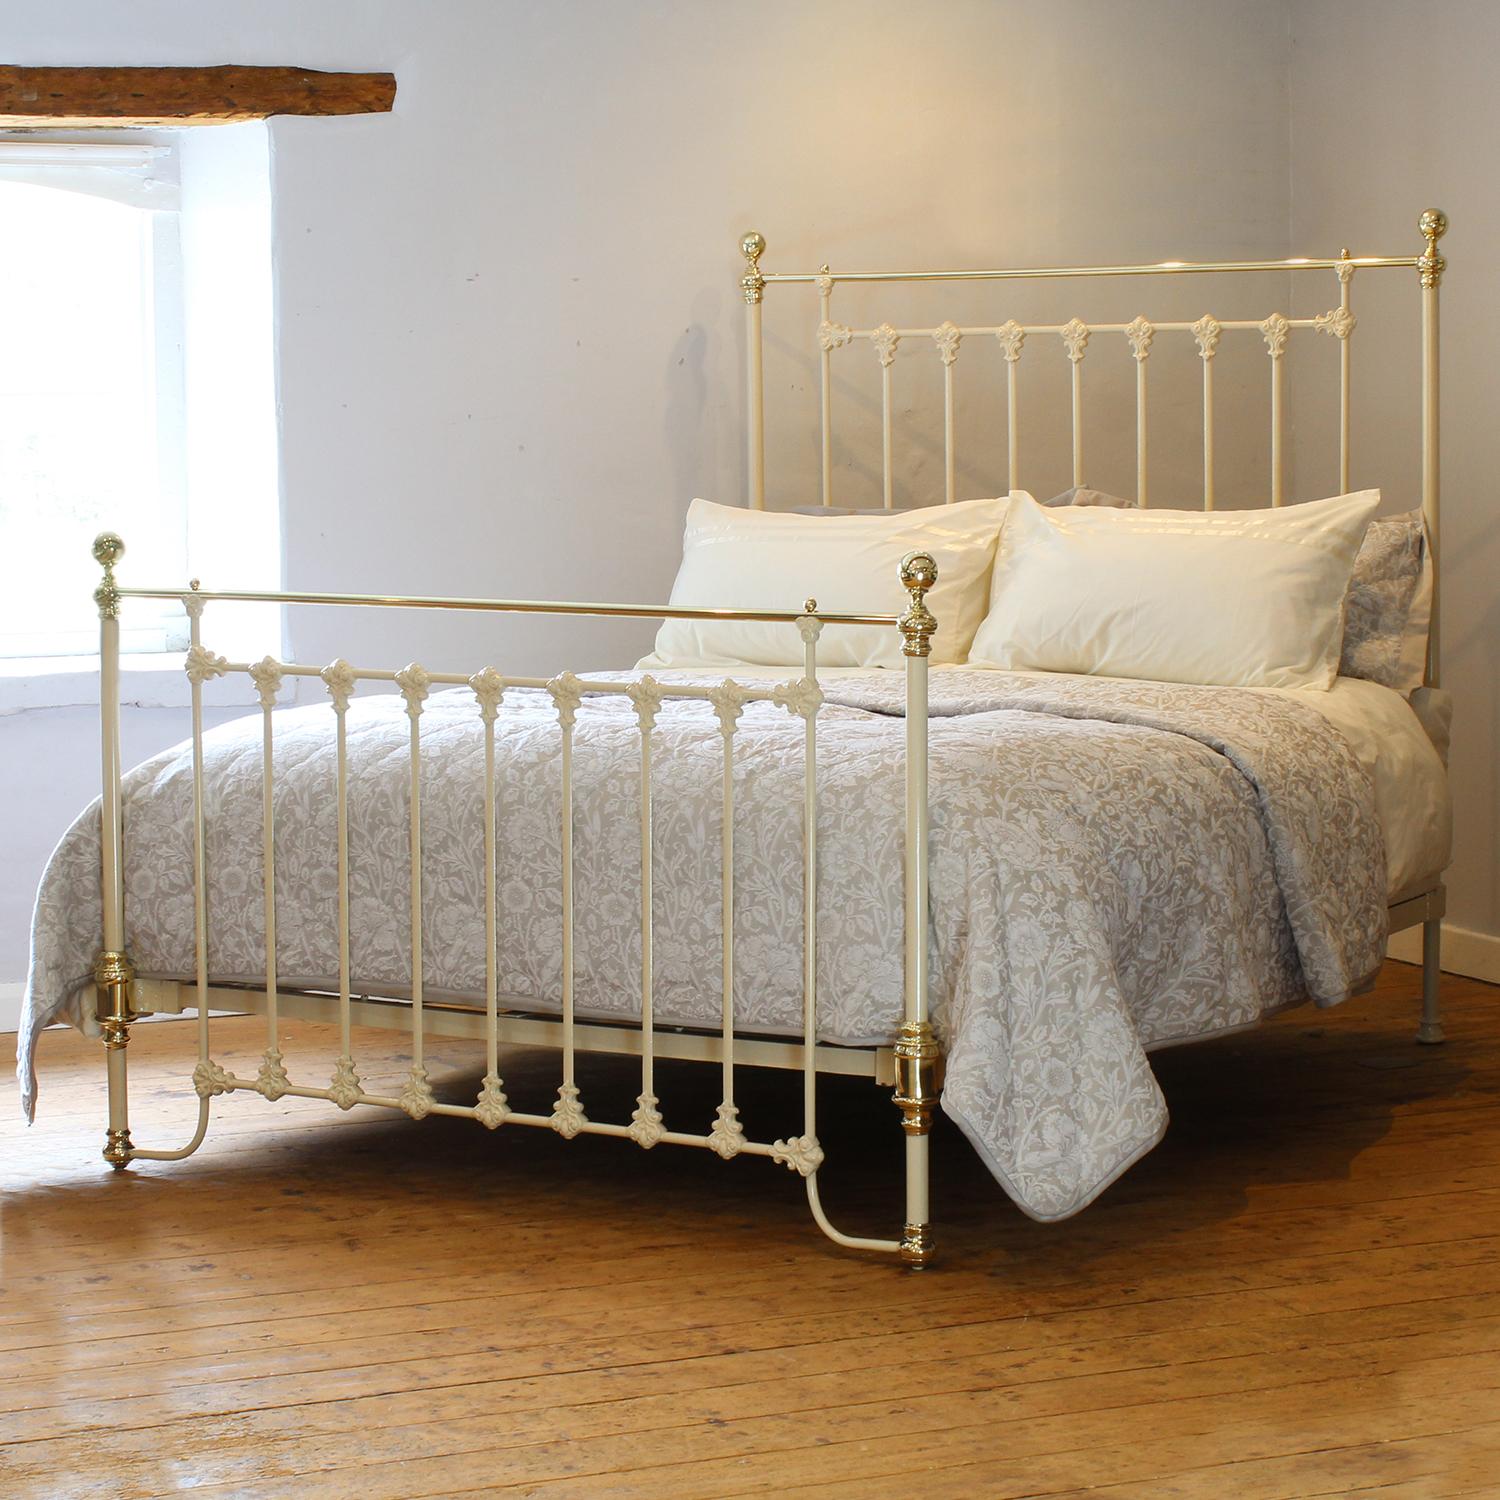 A fine example of a Victorian brass and iron bed finished in cream with large decorative and attractive castings, unusual oval bar panels, straight brass top rails, brass knobs, and brass kneecaps on the foot panel.

This bed accepts a UK King or US